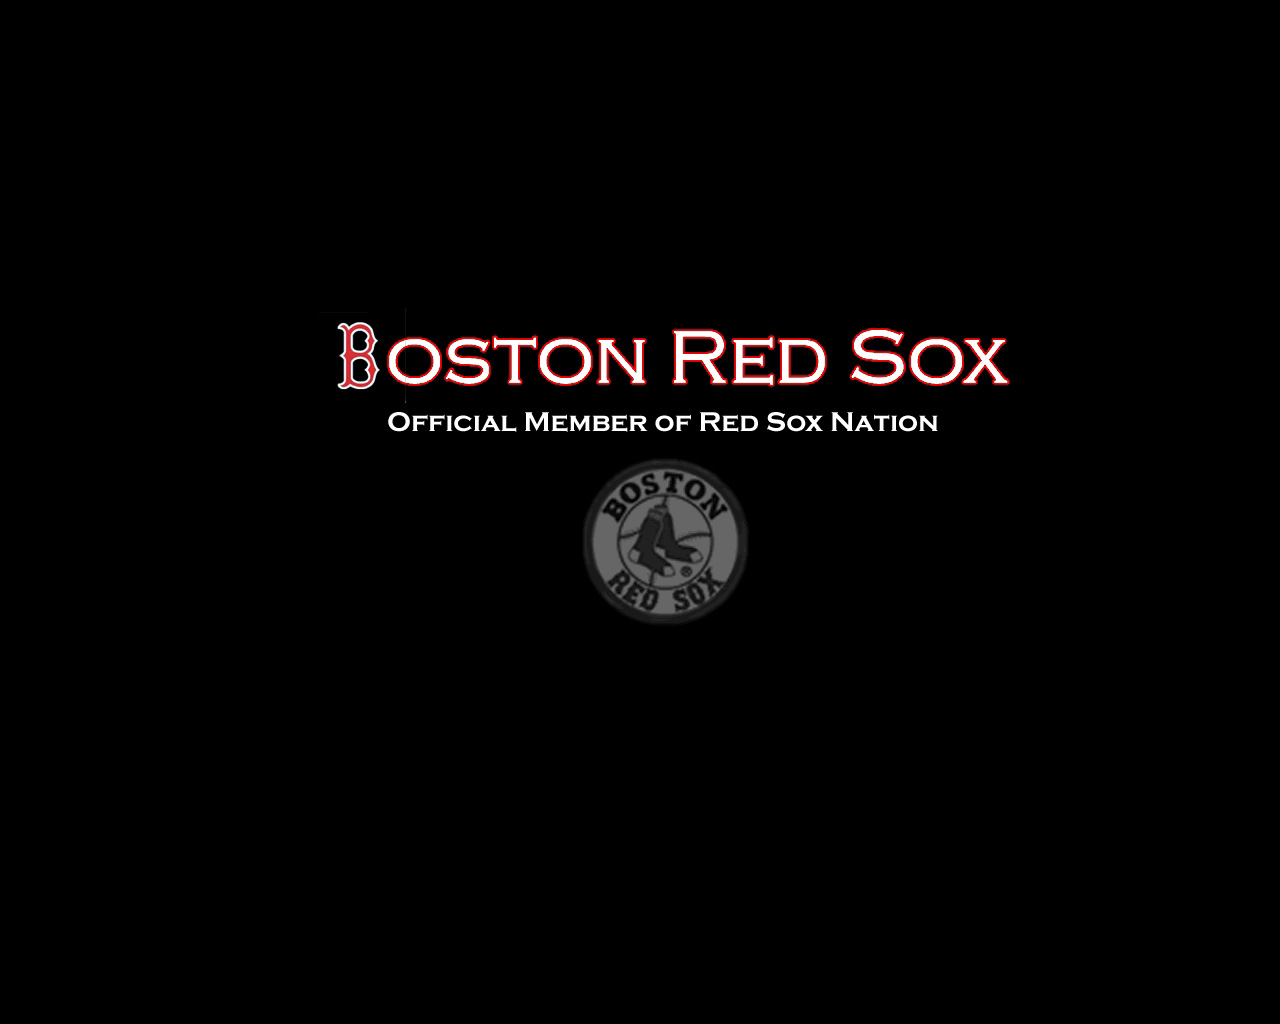 Boston Red Sox wallpapers Boston Red Sox background   Page 5 1280x1024